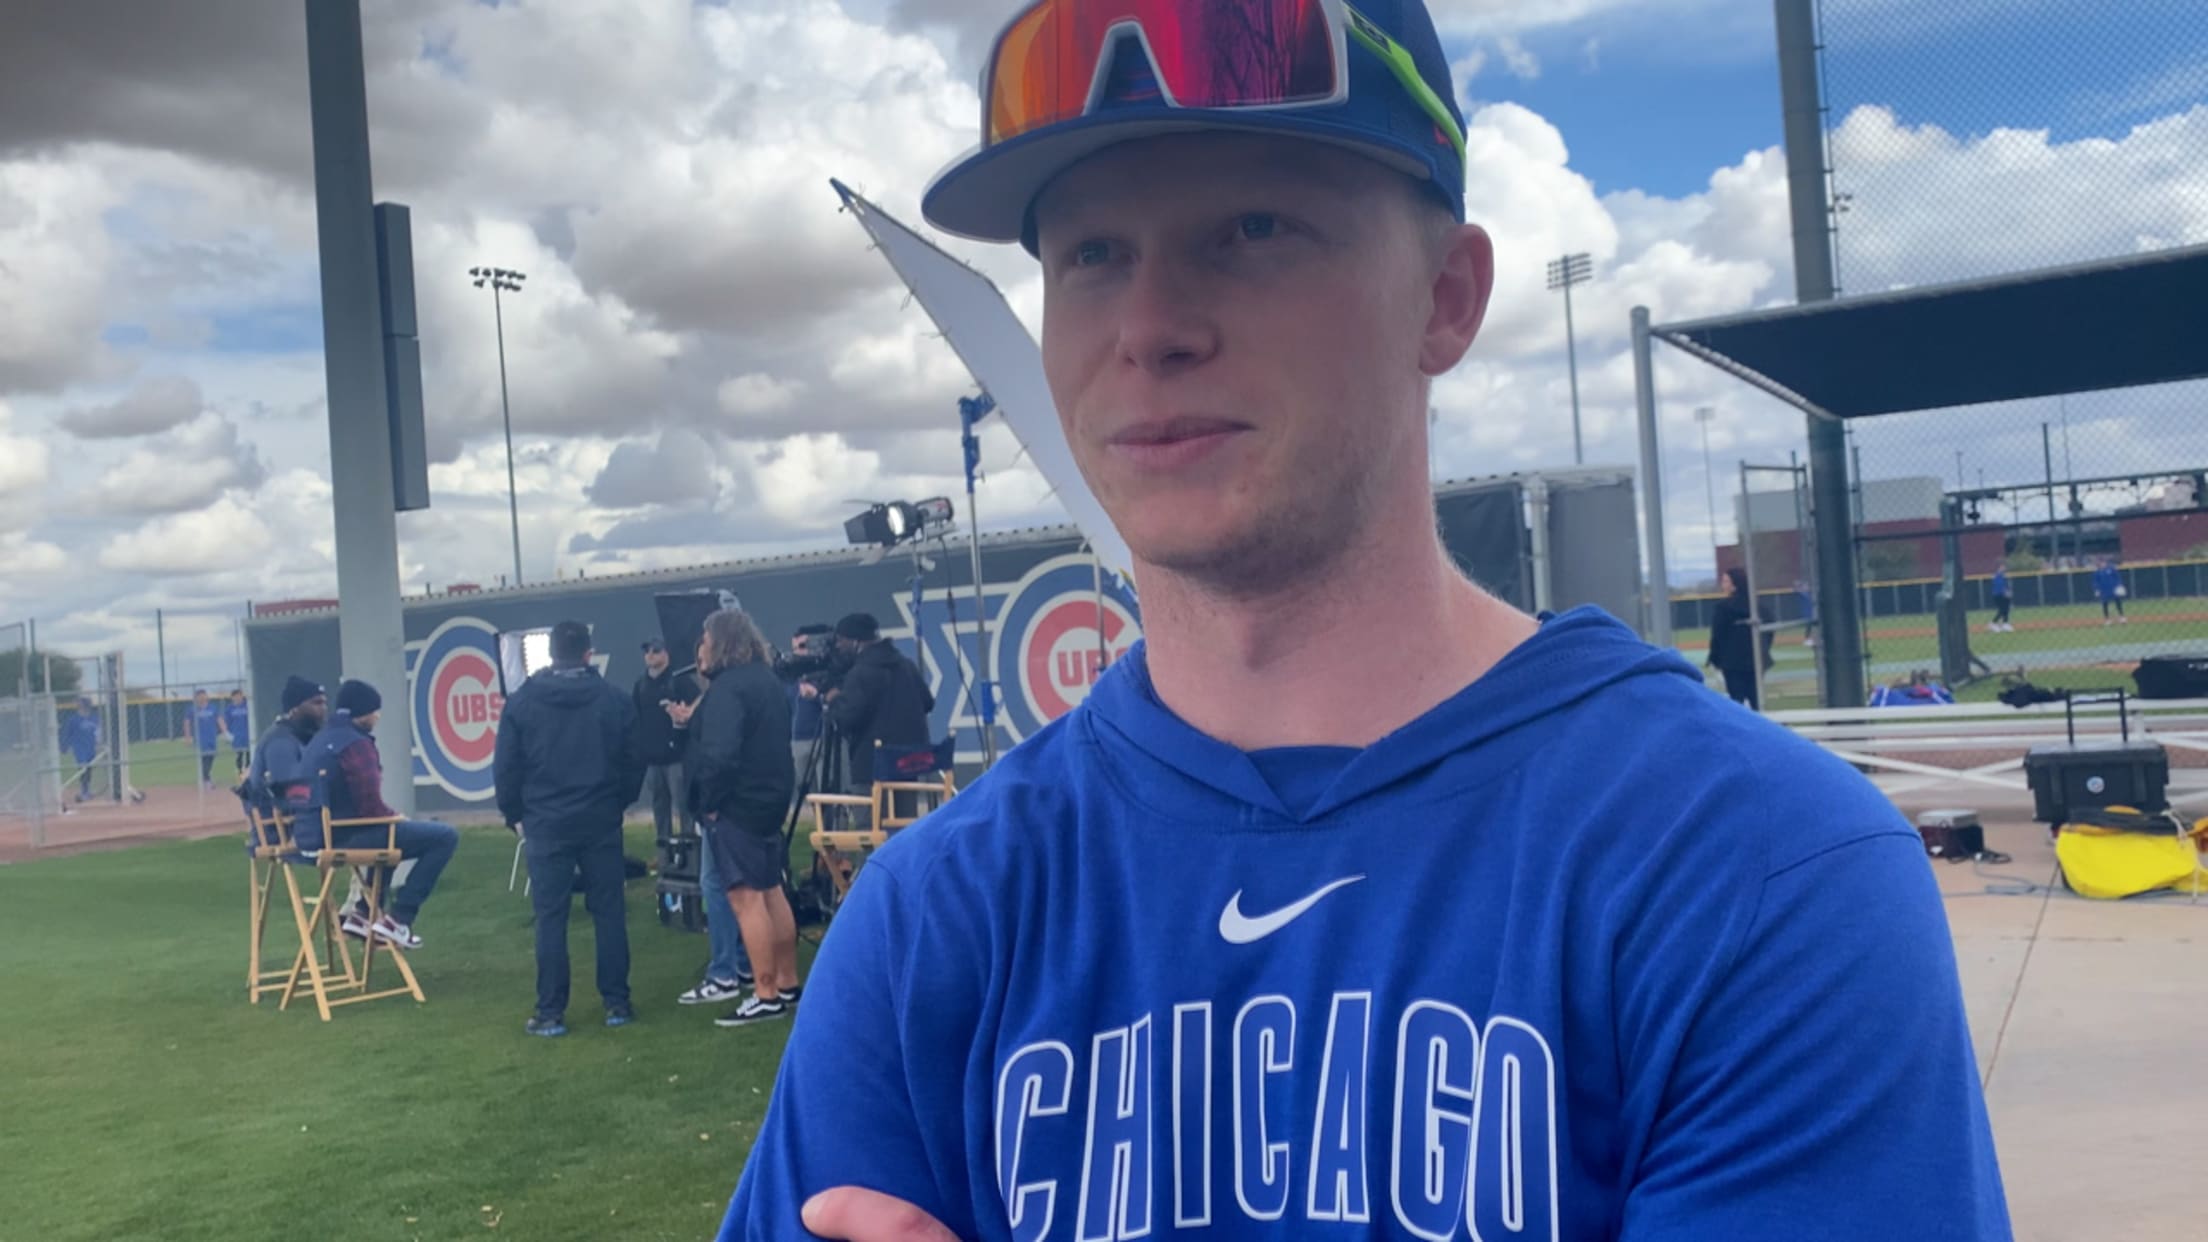 Crow-Armstrong on Spring Training